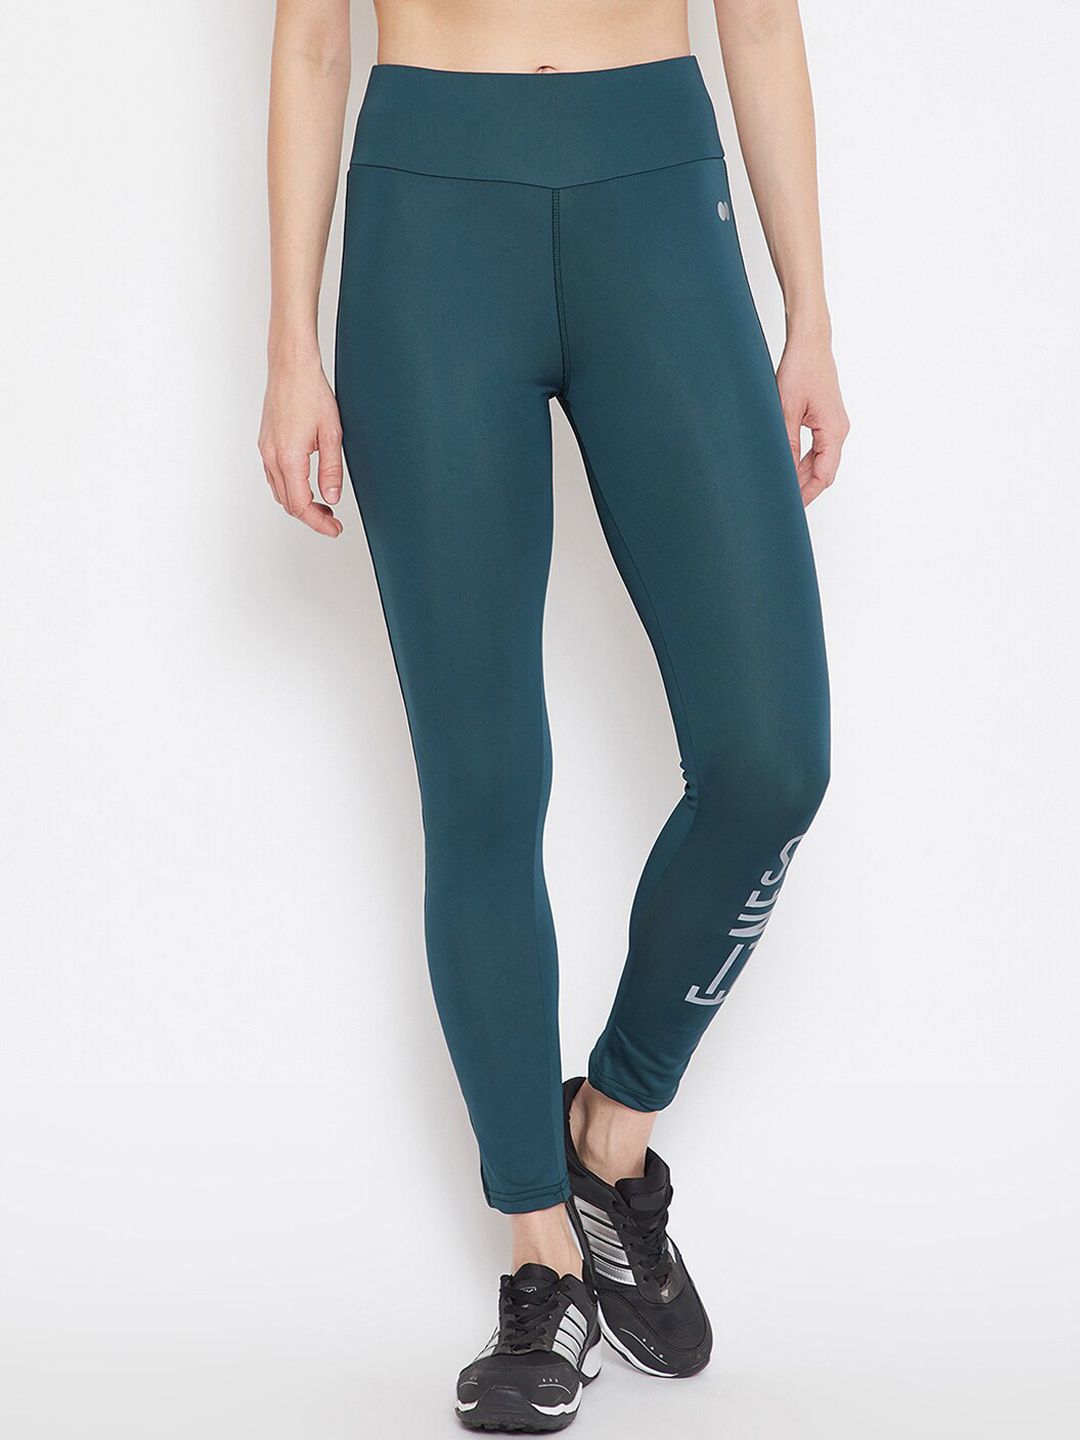 Clovia Women Teal Green Solid Slim-Fit Active Ankle-Length Tights Price in India